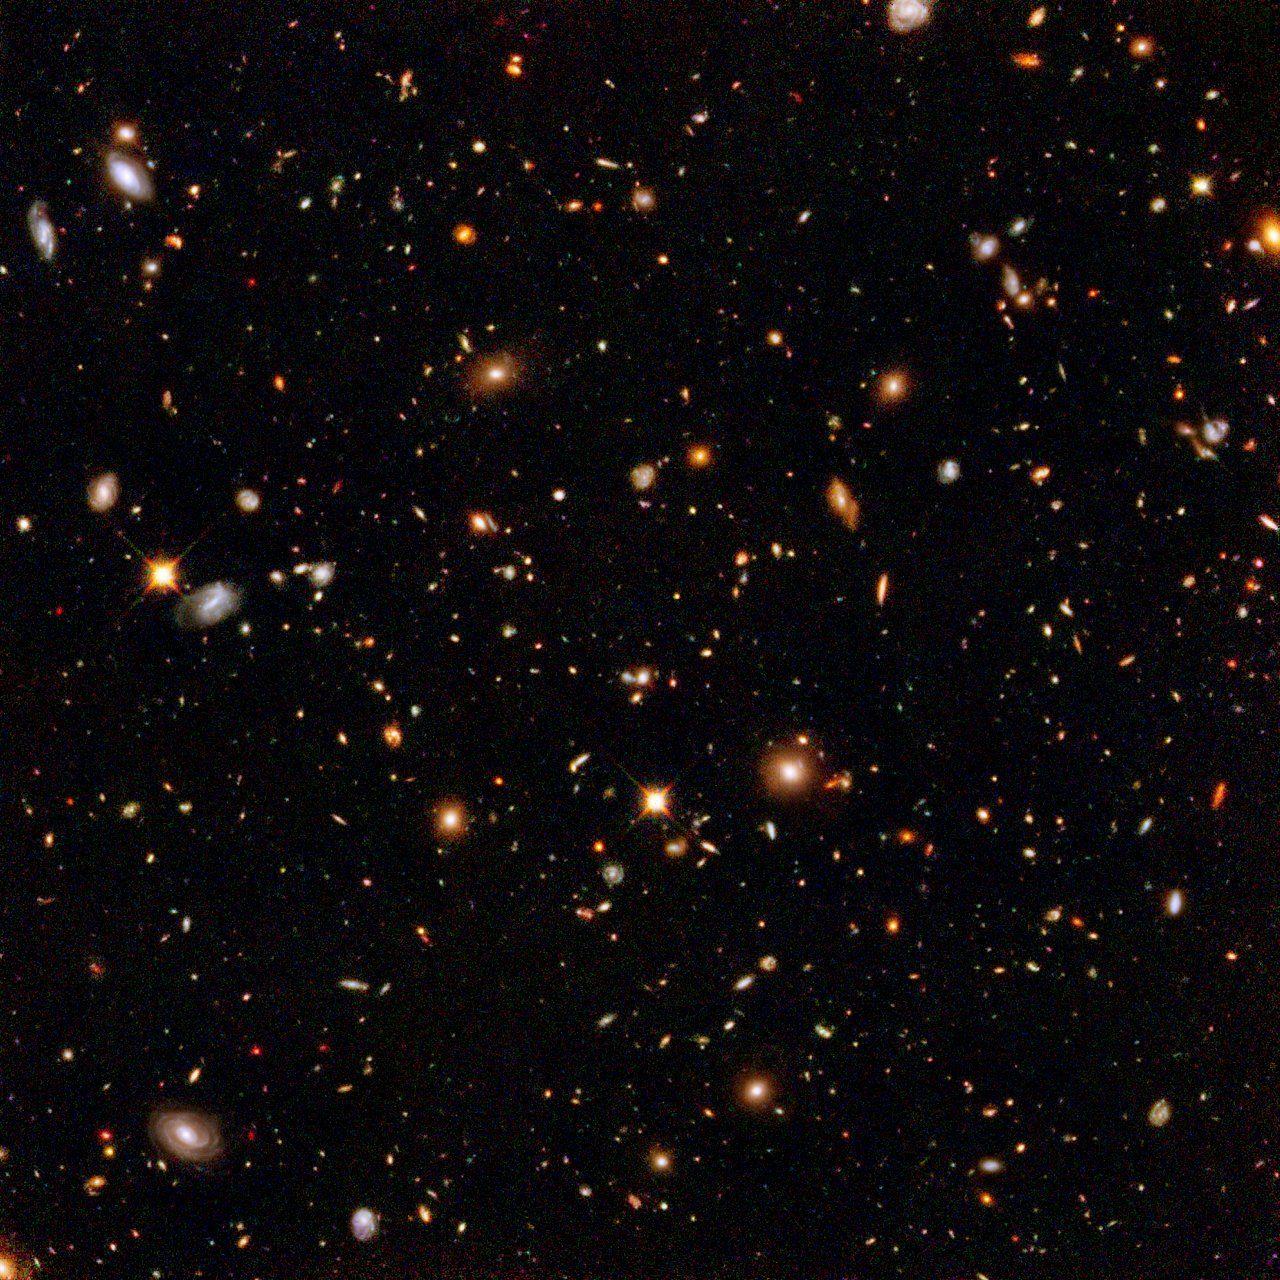 Hubble's Near Infrared Camera Digs For Galactic Gold